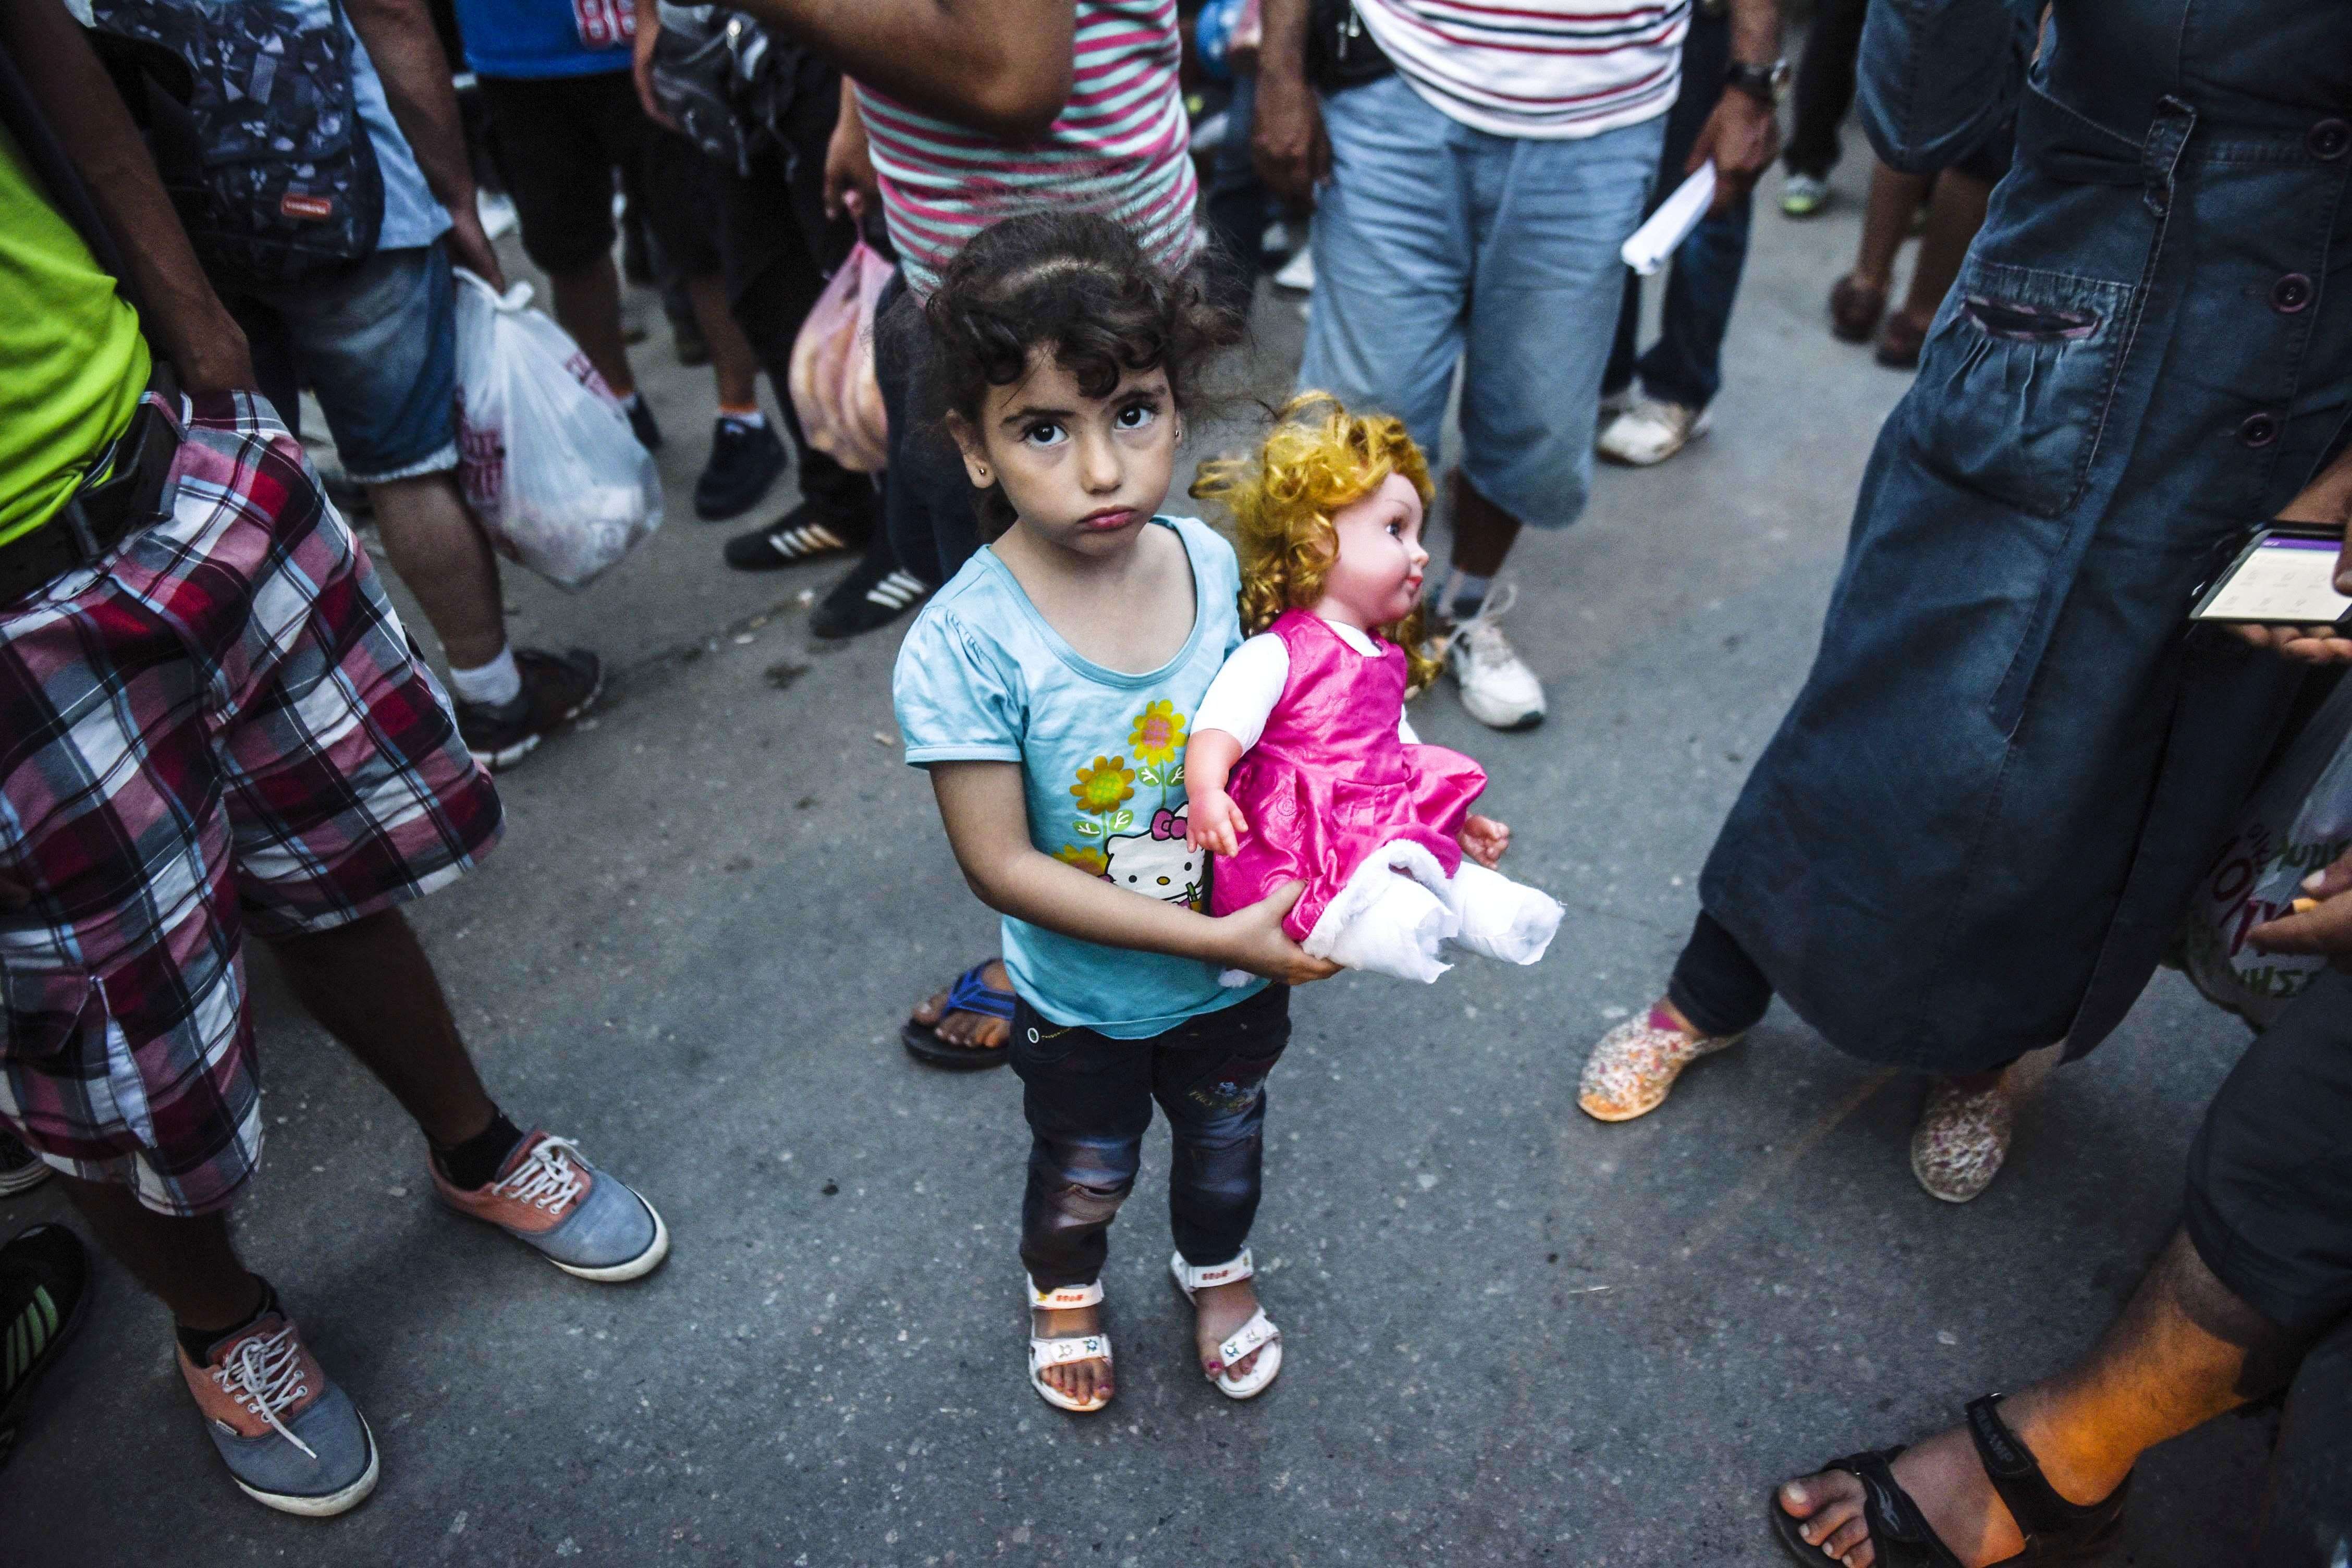 A girl holding a doll, arrives with others migrants at the refugee center in the town of Presevo, after walking from Macedonia to Serbia. (AFP PHOTO / ARMEND NIMANI)